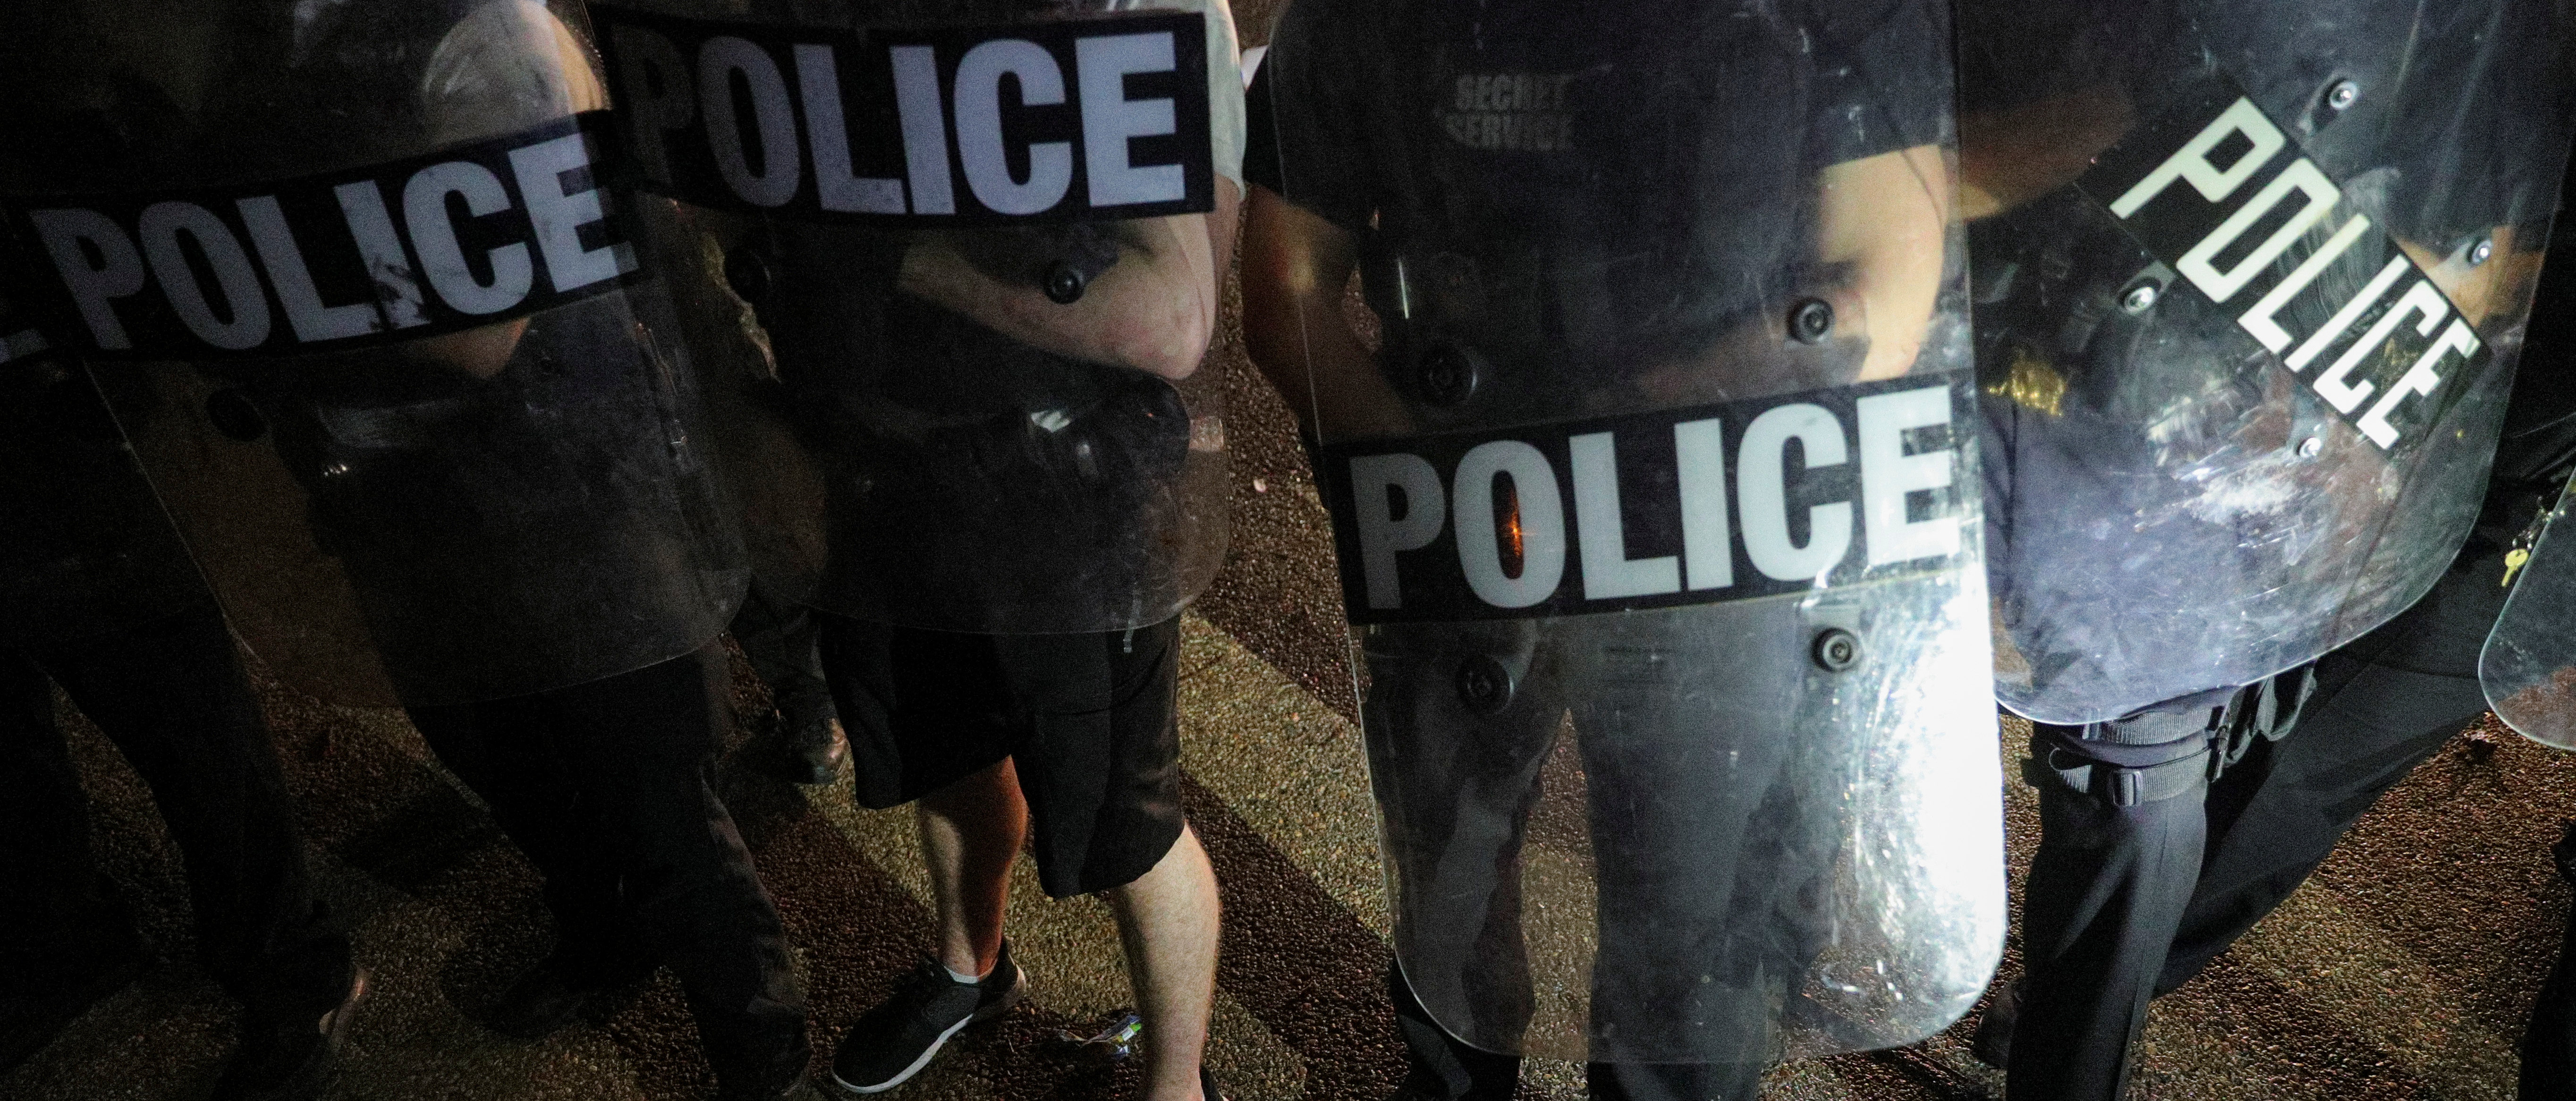 U.S. Secret Service uniformed division officers holding riot shields stand among water bottles and other object thrown at them after midnight by a crowd demonstrating against the death in Minneapolis police custody of African-American man George Floyd, as the officers keep demonstrators away from the White House during a protest in Lafayette Park in Washington, U.S. May 30, 2020. REUTERS/Tom Brenner 